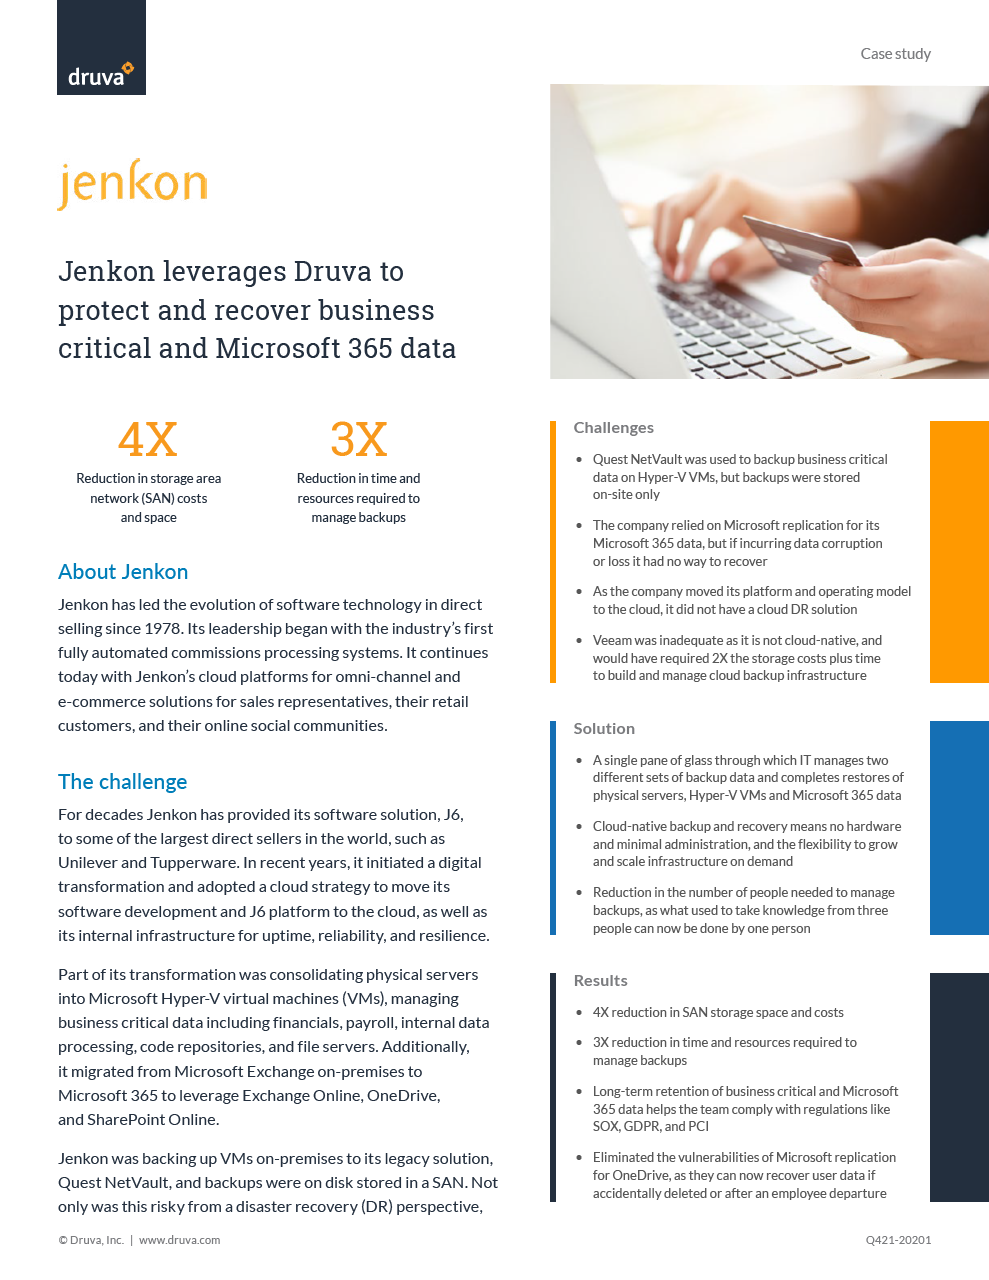 Jenkon leverages Druva for to protect and recover business critical and Microsoft 365 data